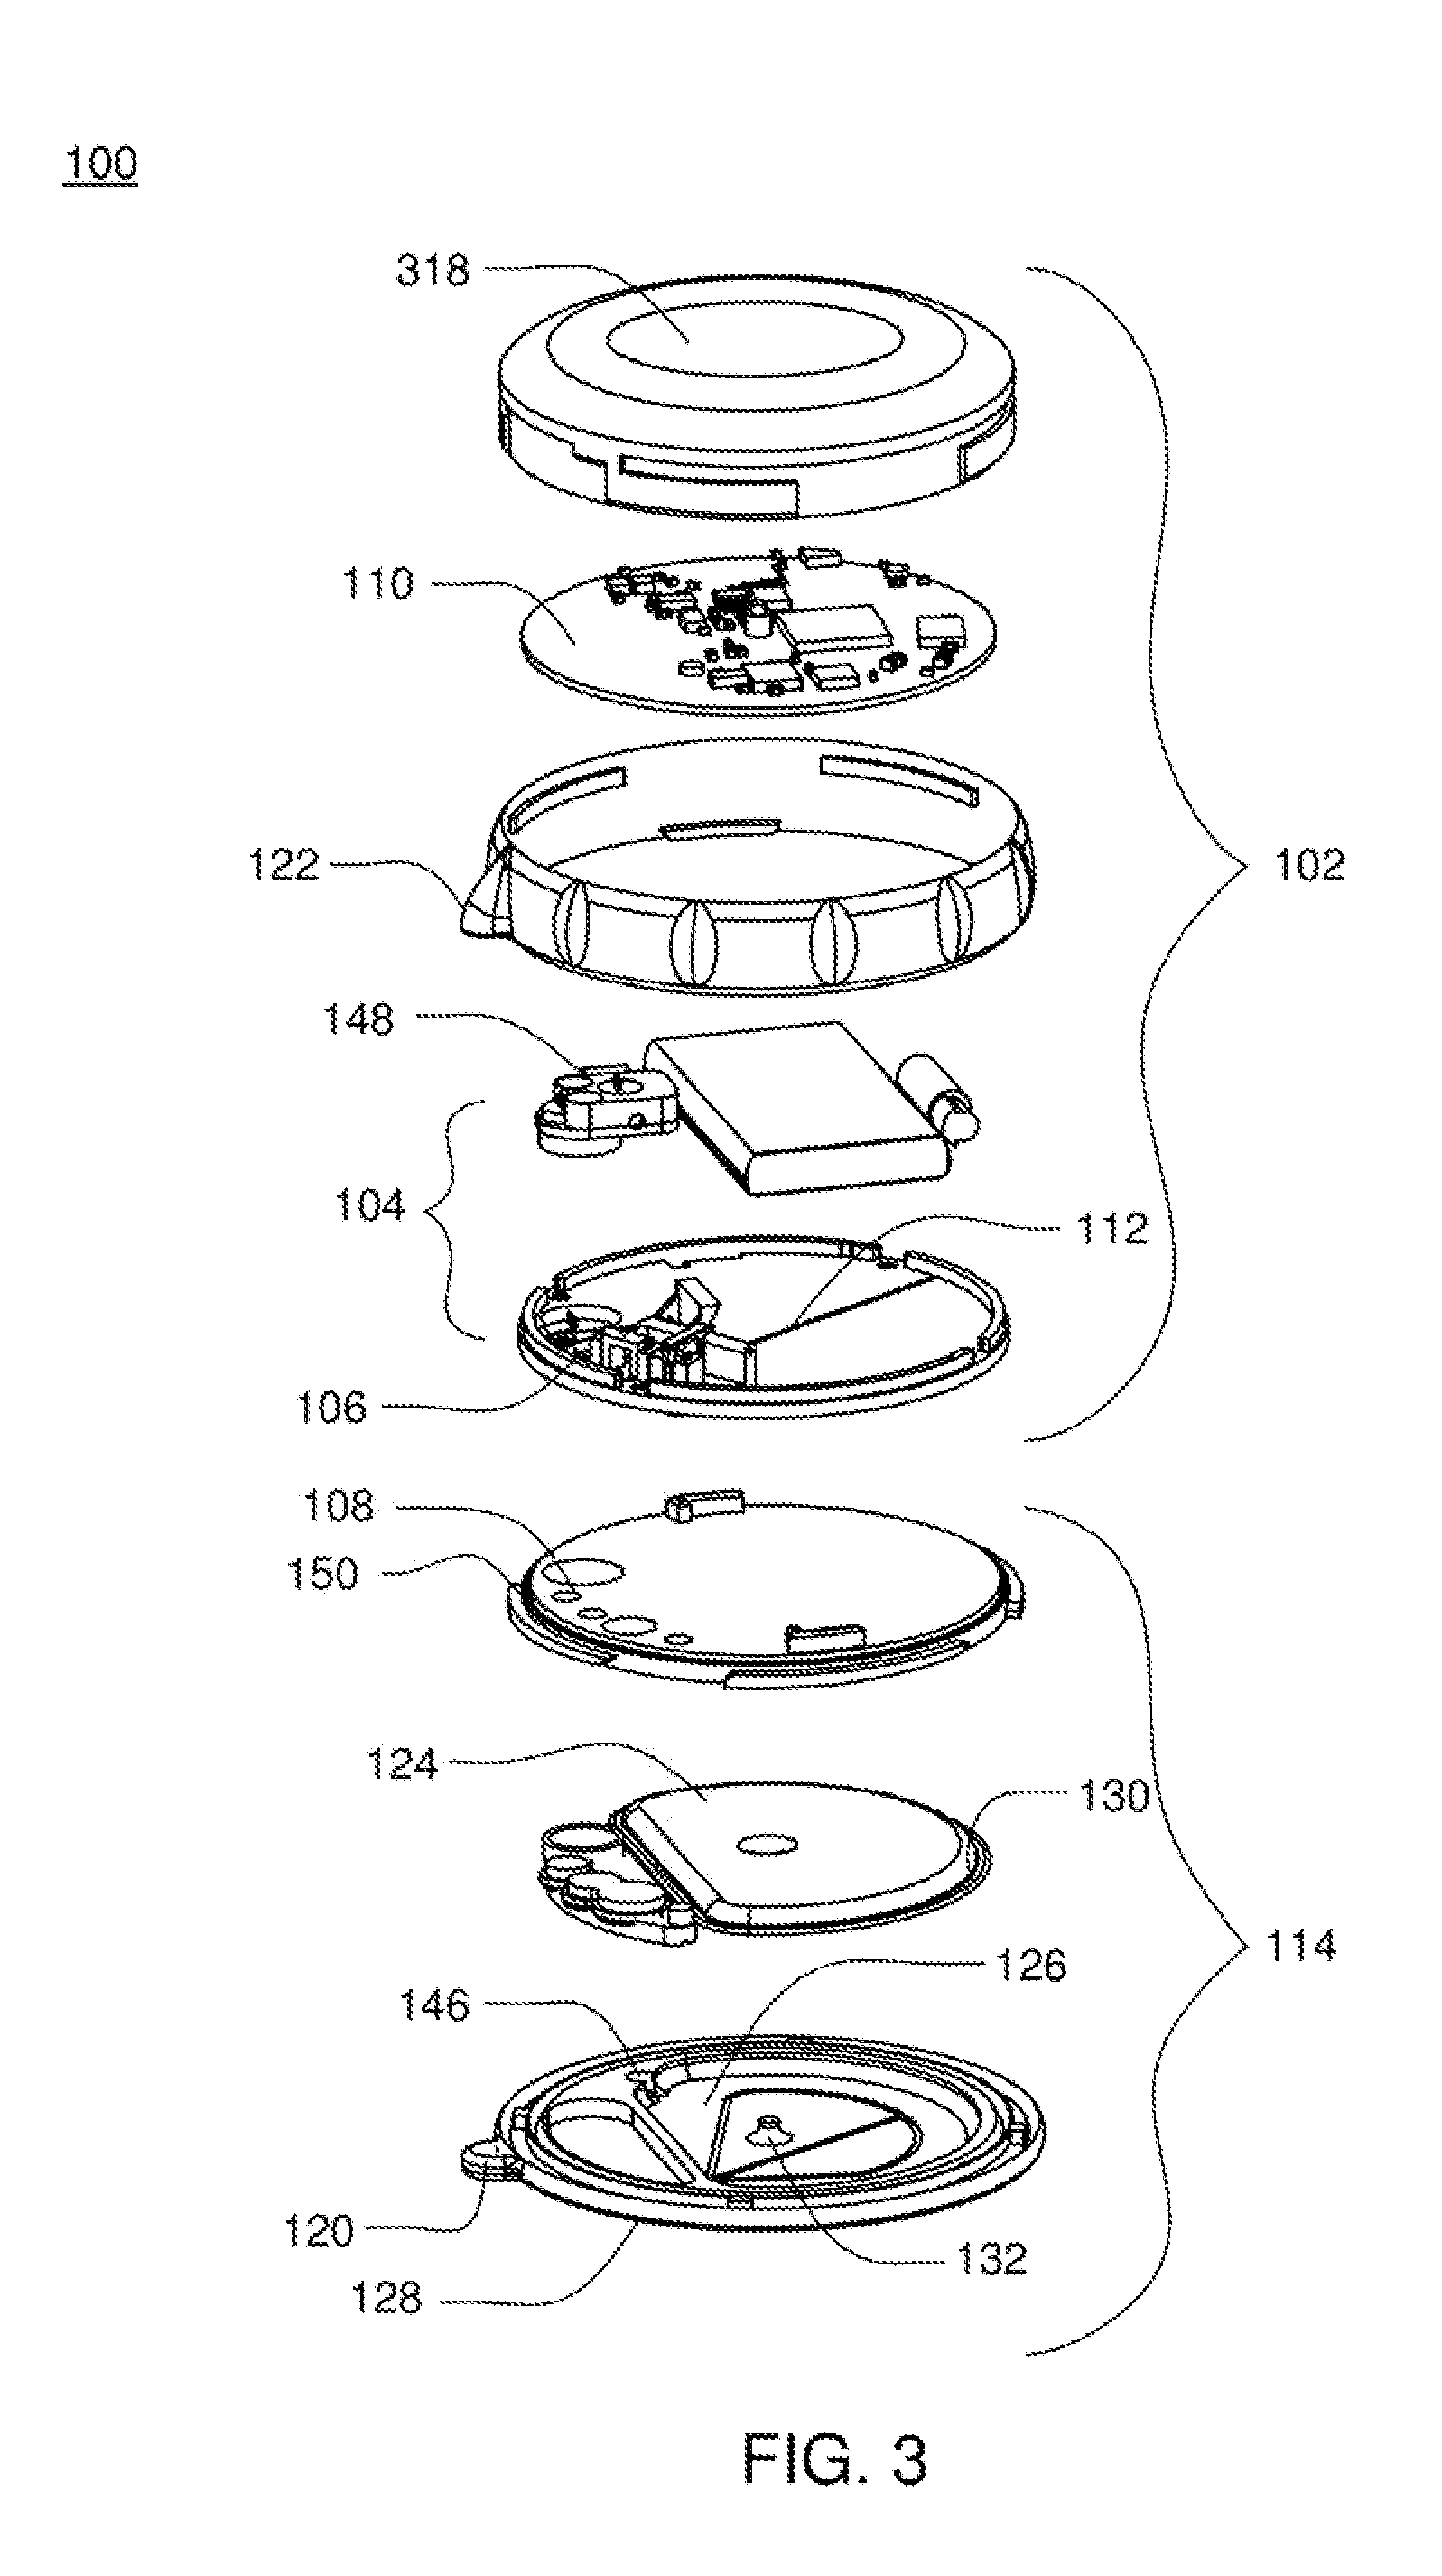 Method and system for shape-memory alloy wire control